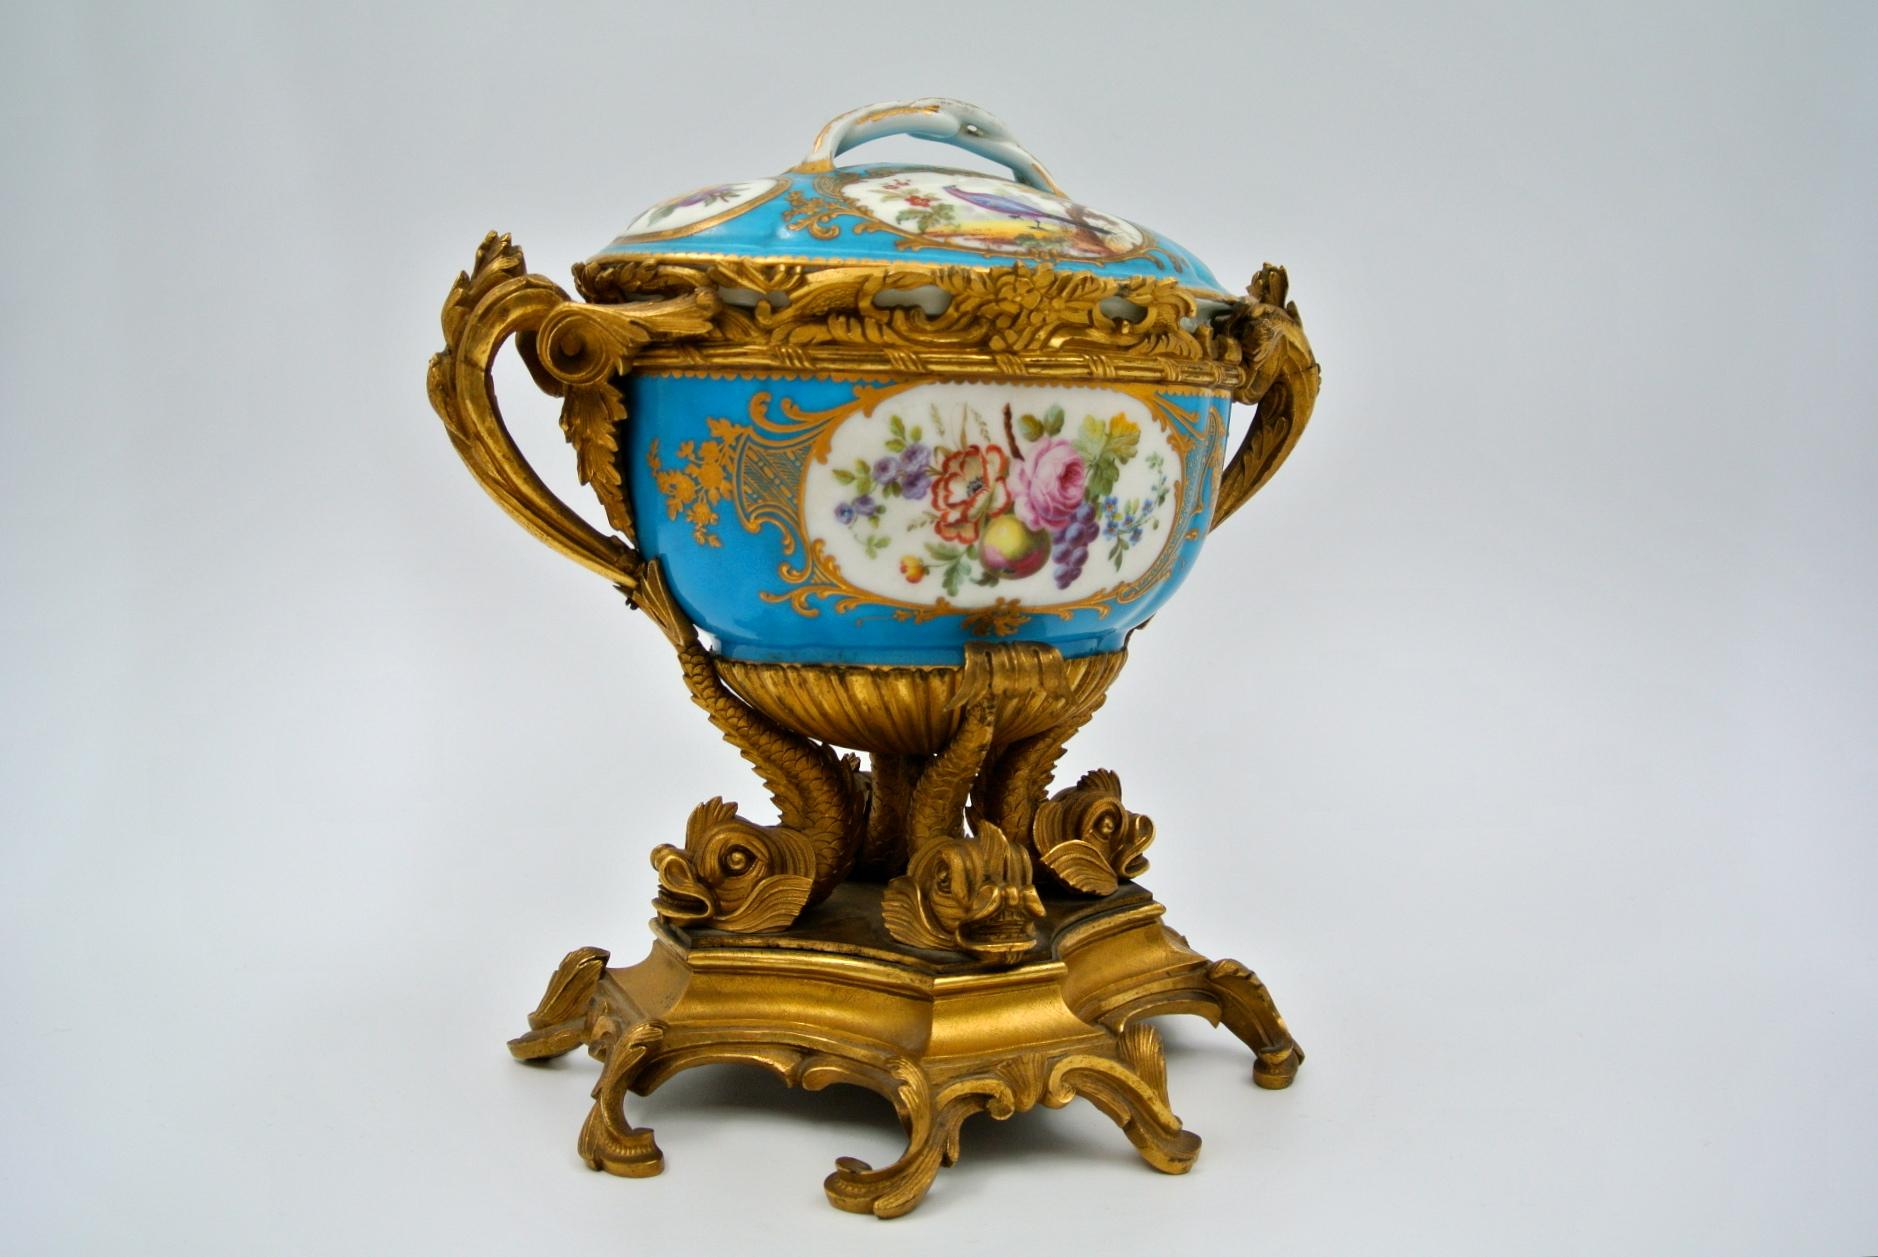 Gilt Covered Cup in Chiselled and Gilded Bronze and Painted Sèvres Porcelain